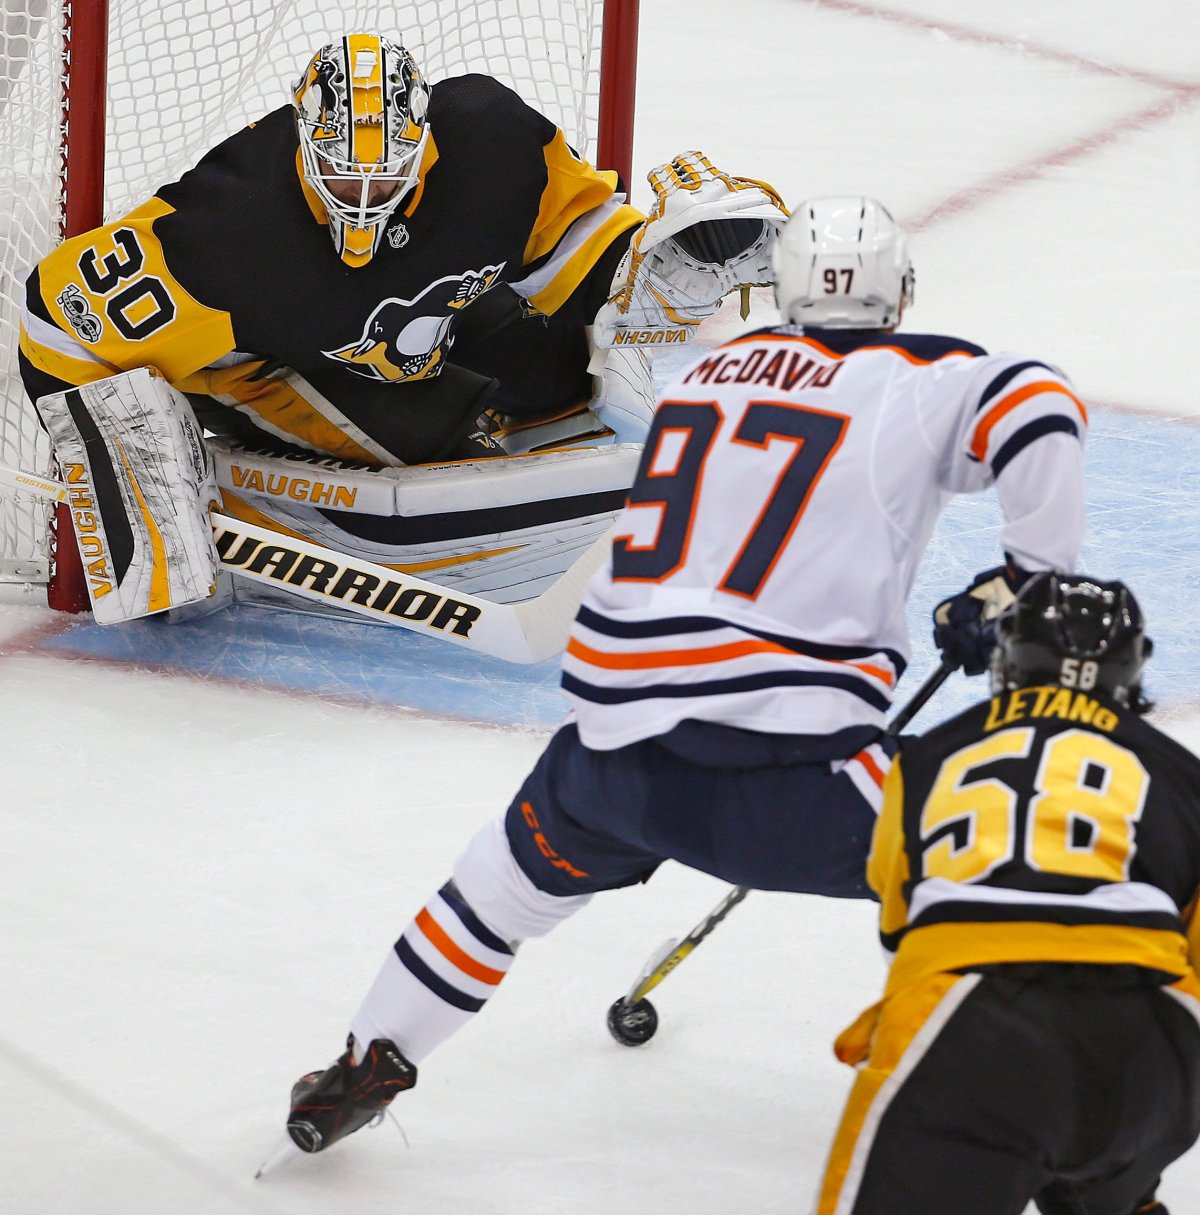 Edmonton Oilers' Connor McDavid (97) goes to the backhand in front of Pittsburgh Penguins goalie Matthew Murray (30) with Kris Letang (58) defending in the first period of an NHL hockey game in Pittsburgh, Tuesday, Oct. 24, 2017. McDavids shot went wide. (AP Photo/Gene J. Puskar).